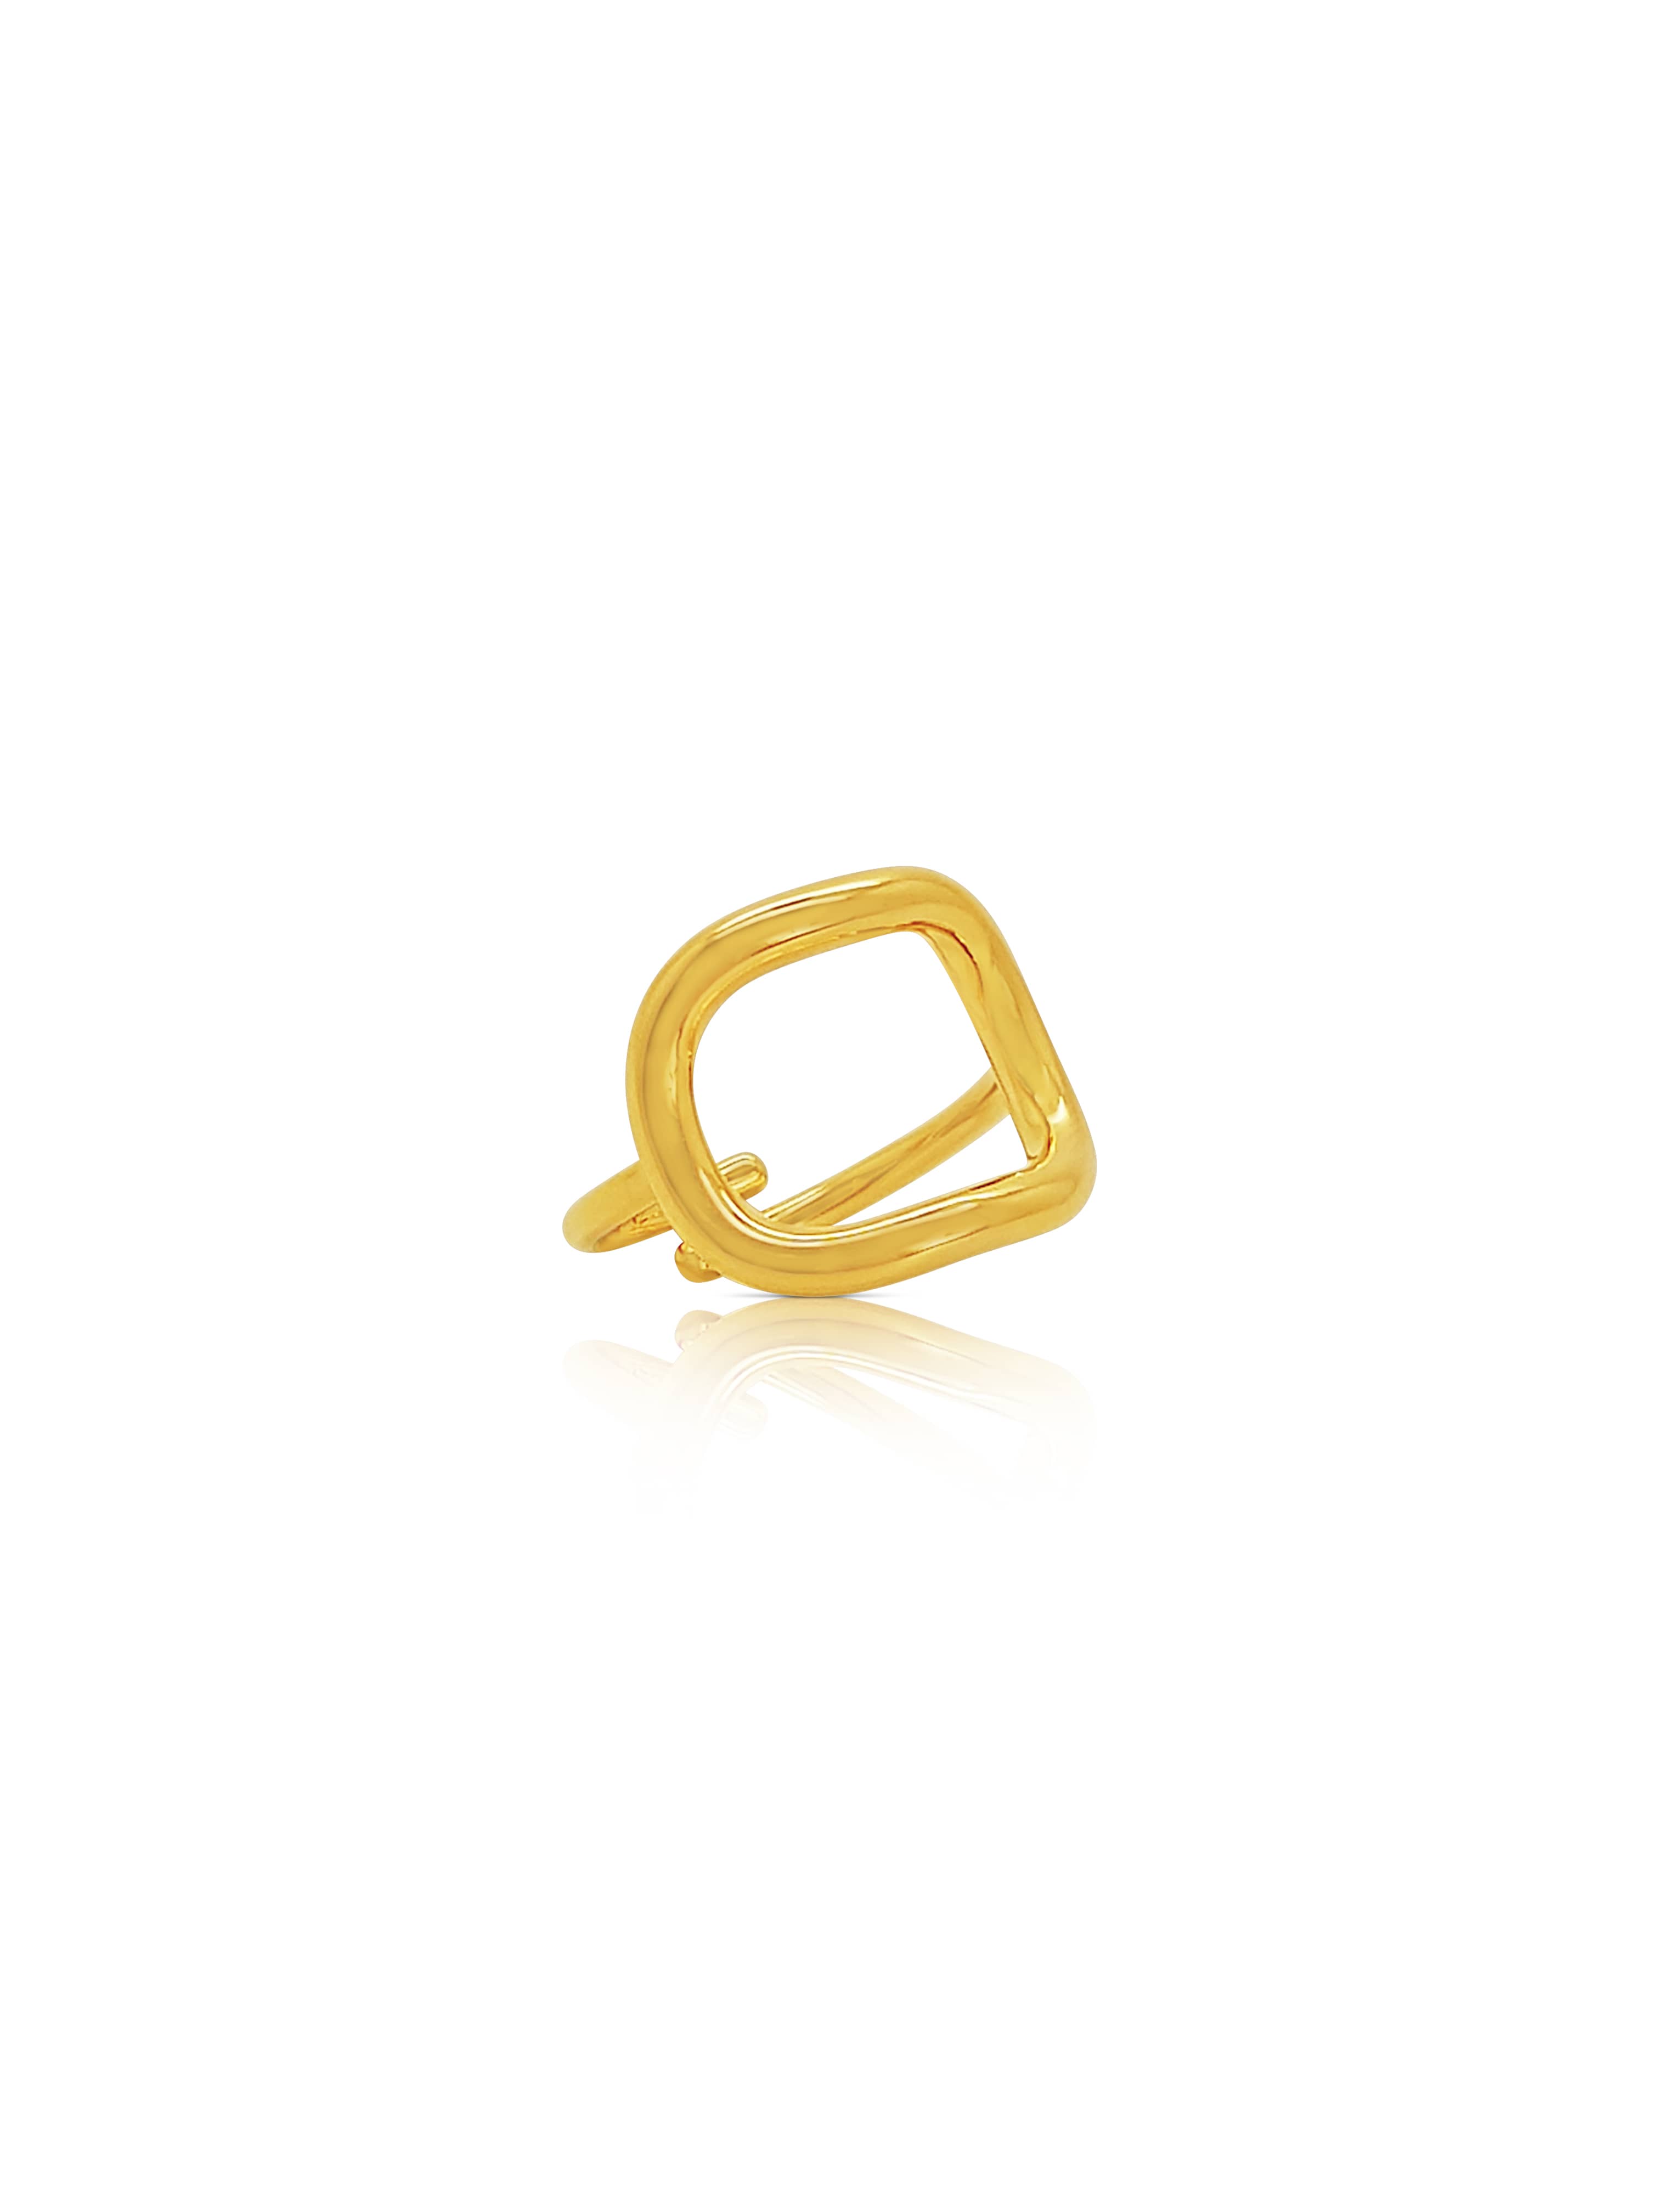 Square Shaped Adjustable Ring